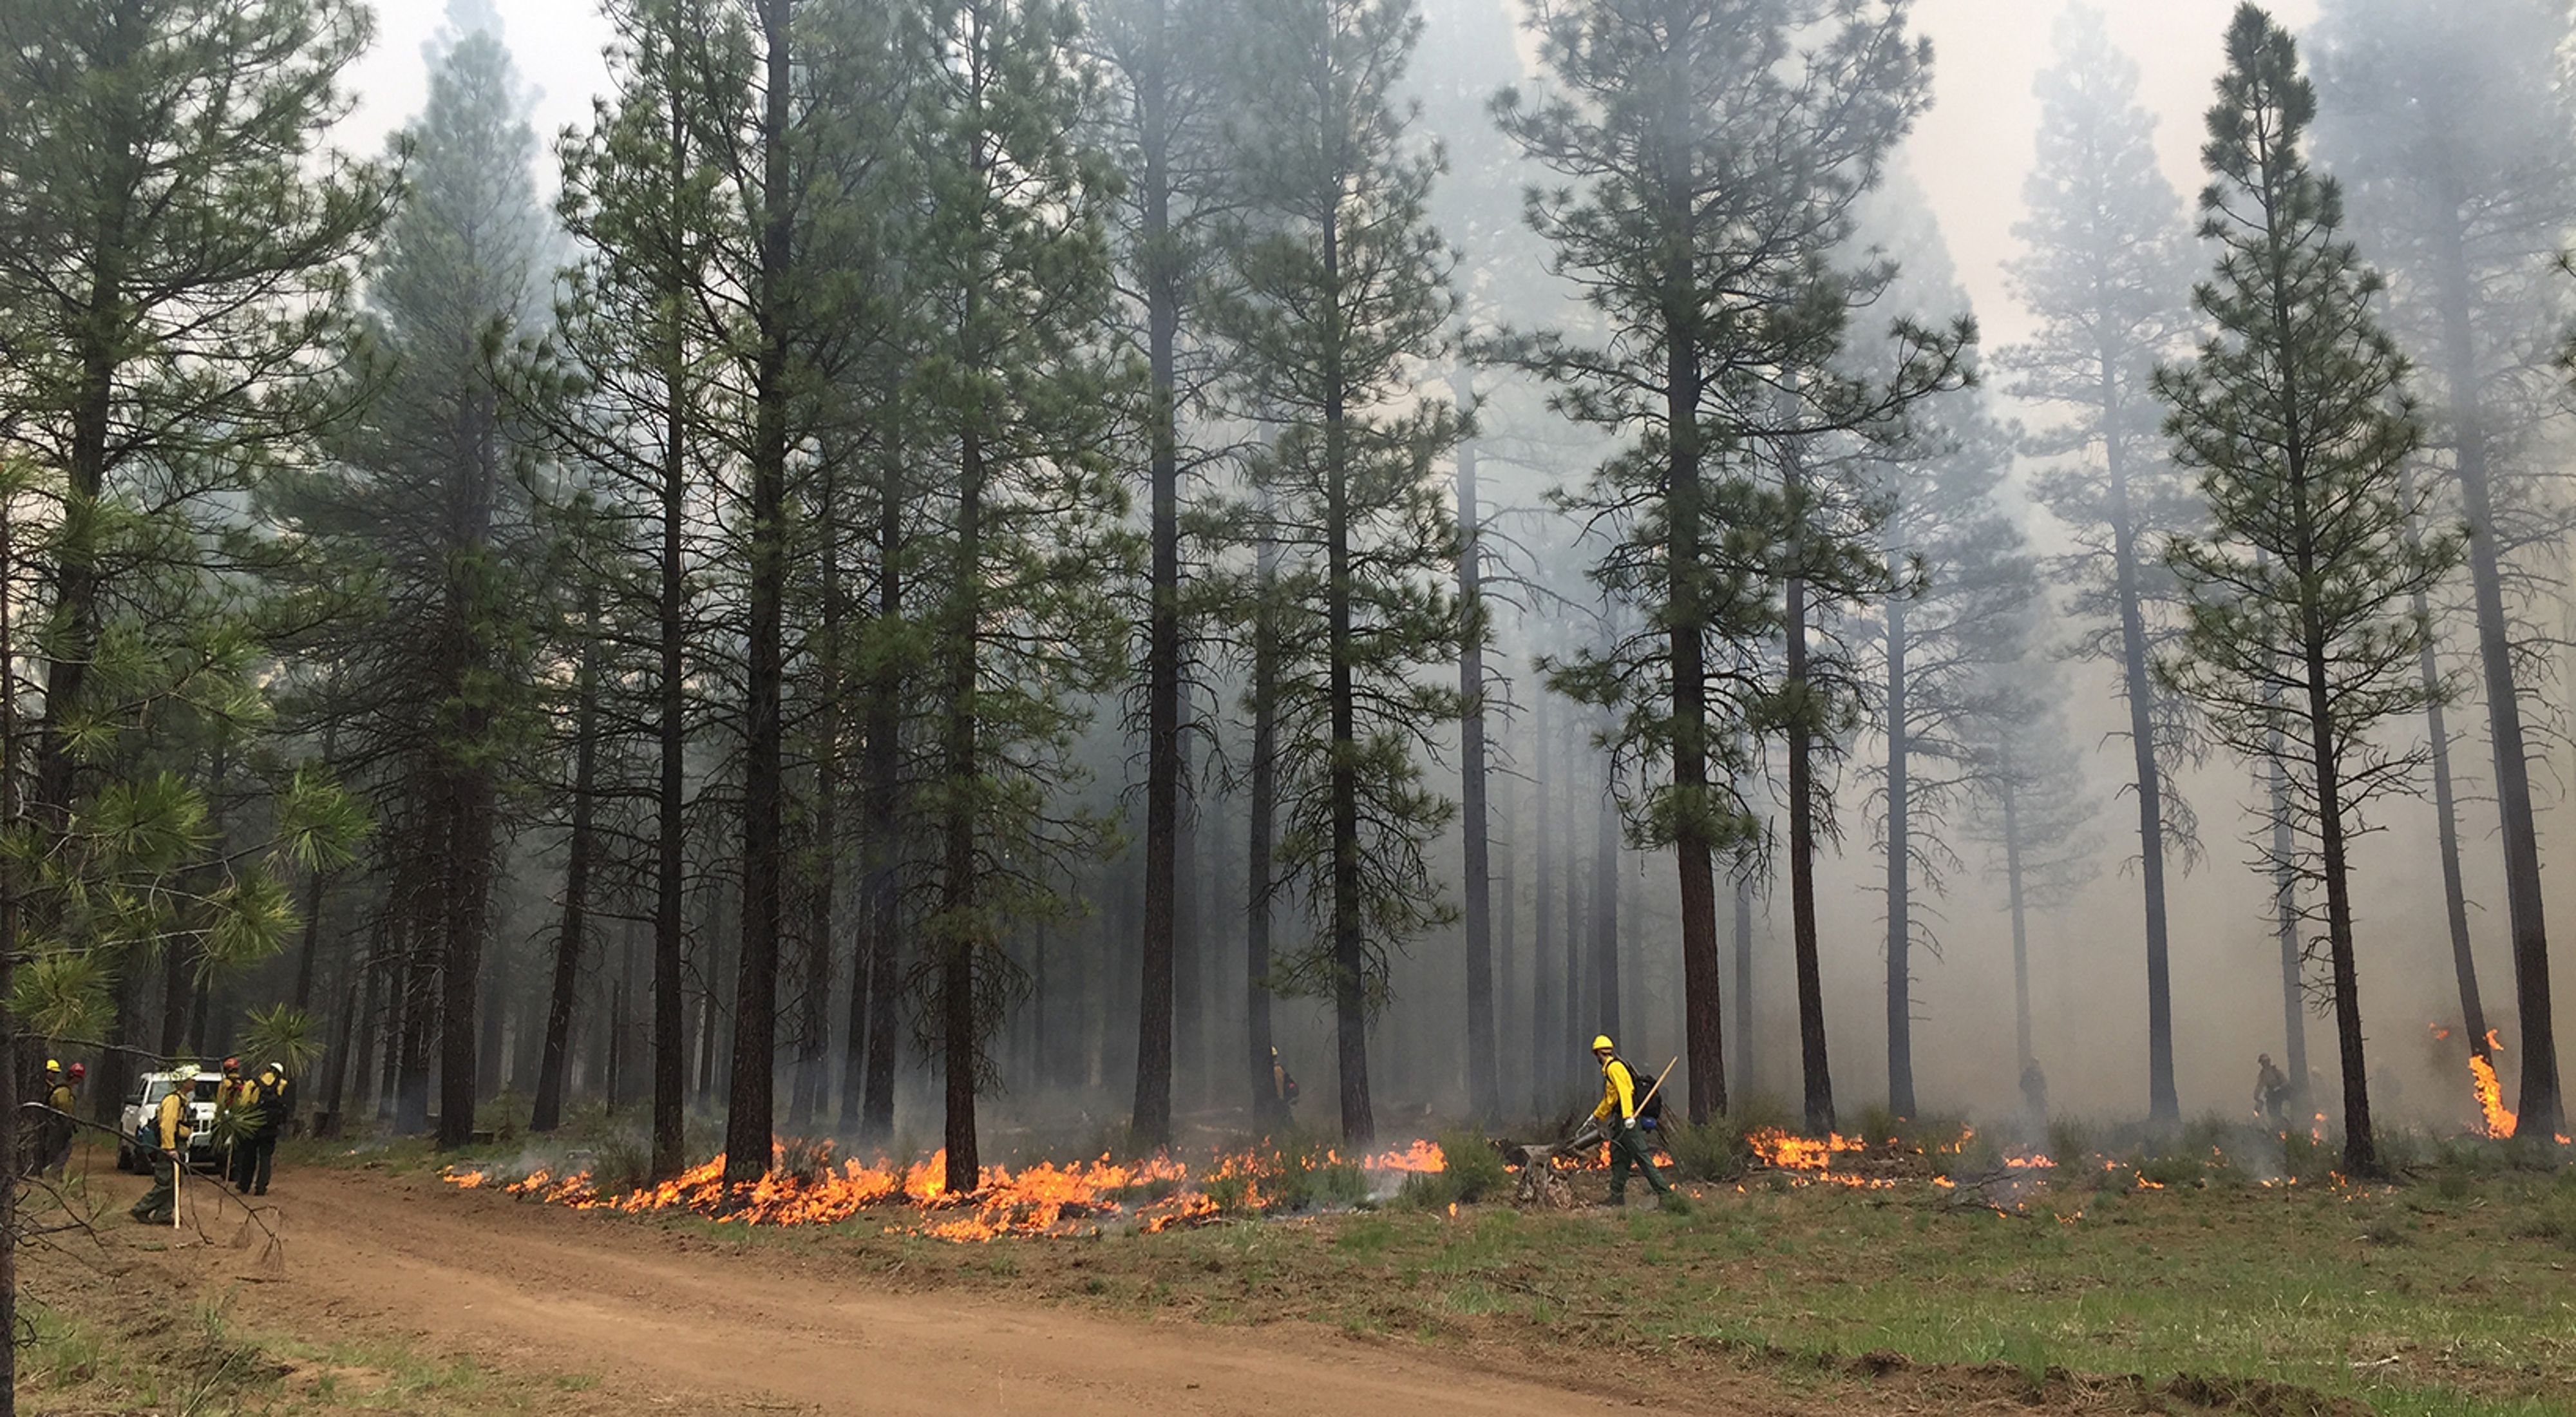 Planned fires pave the way for safer communities and fire-adapted ecosystems restored to a healthier, more resilient condition.